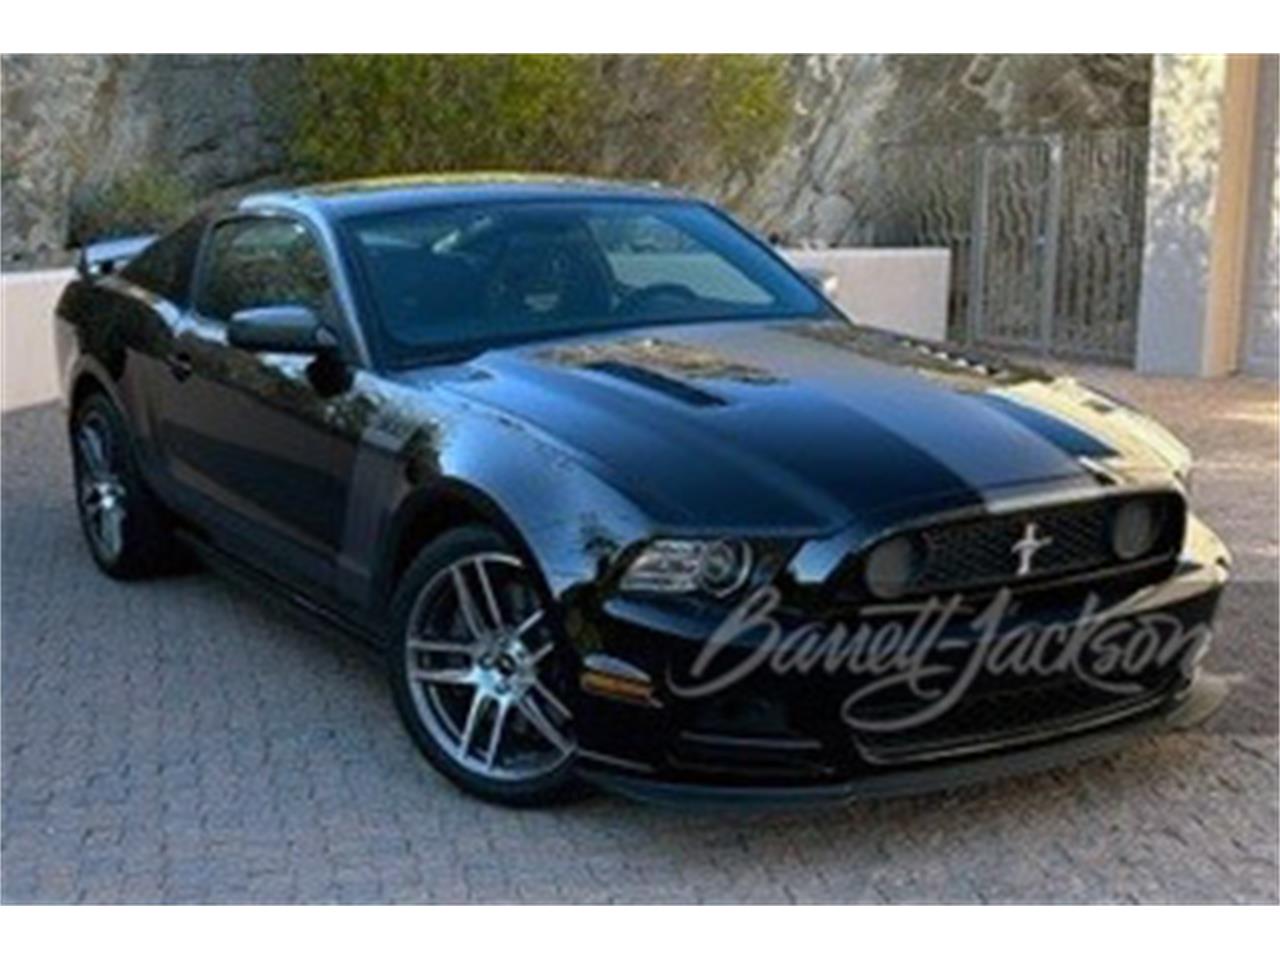 For Sale at Auction: 2013 Ford Mustang Boss 302 in Scottsdale, Arizona for sale in Scottsdale, AZ